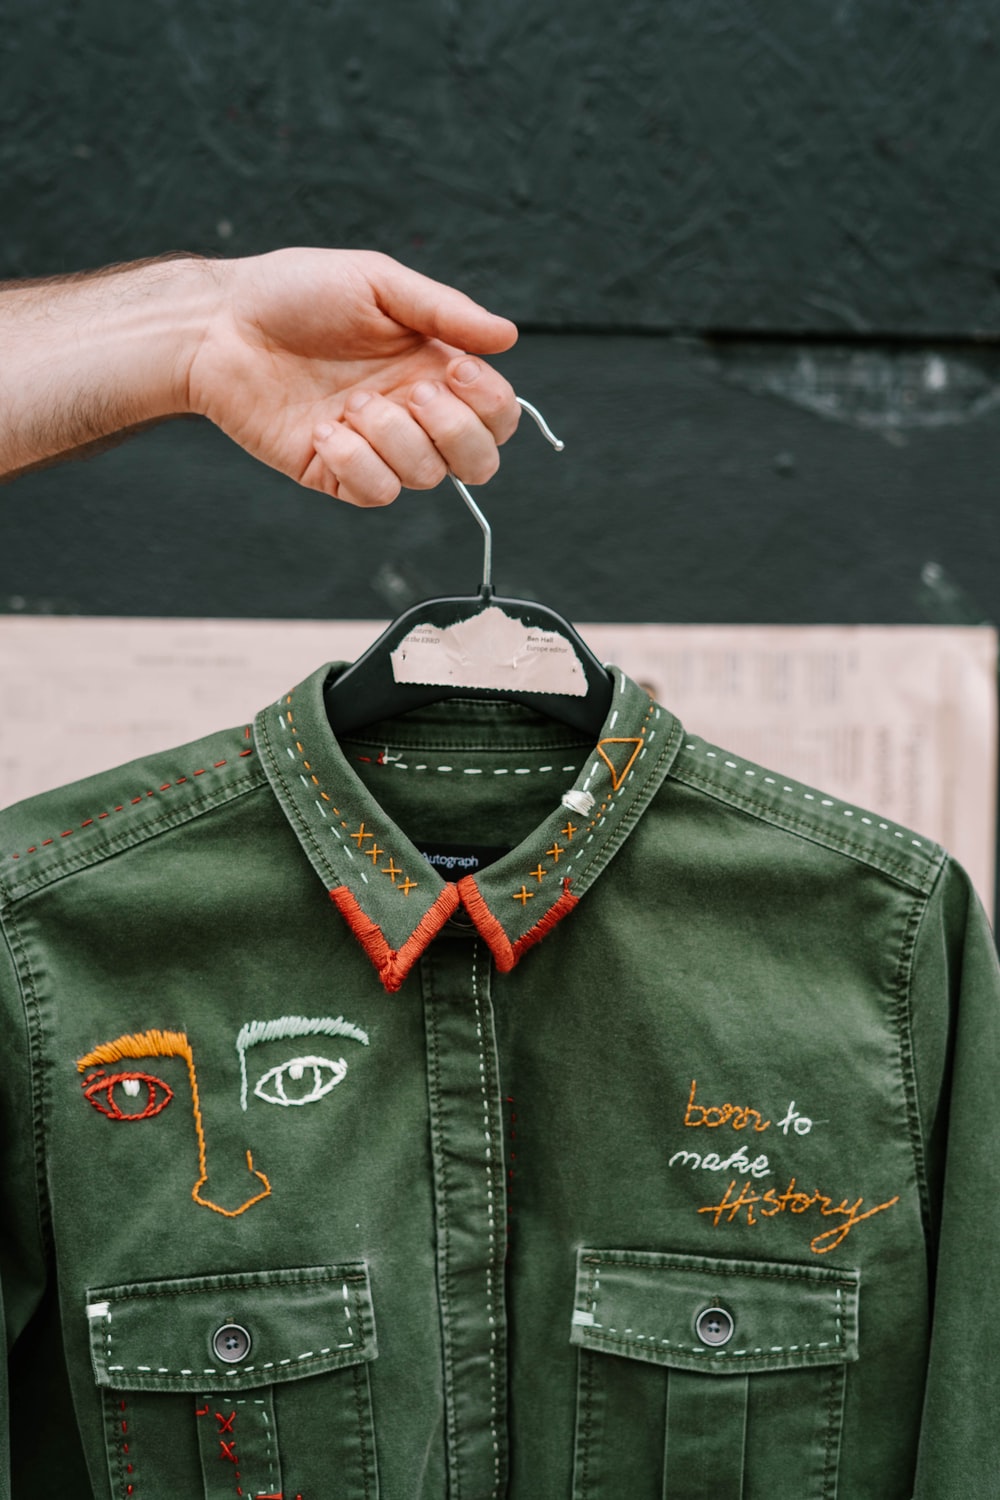 person holding upcycled green jacket with embroidery